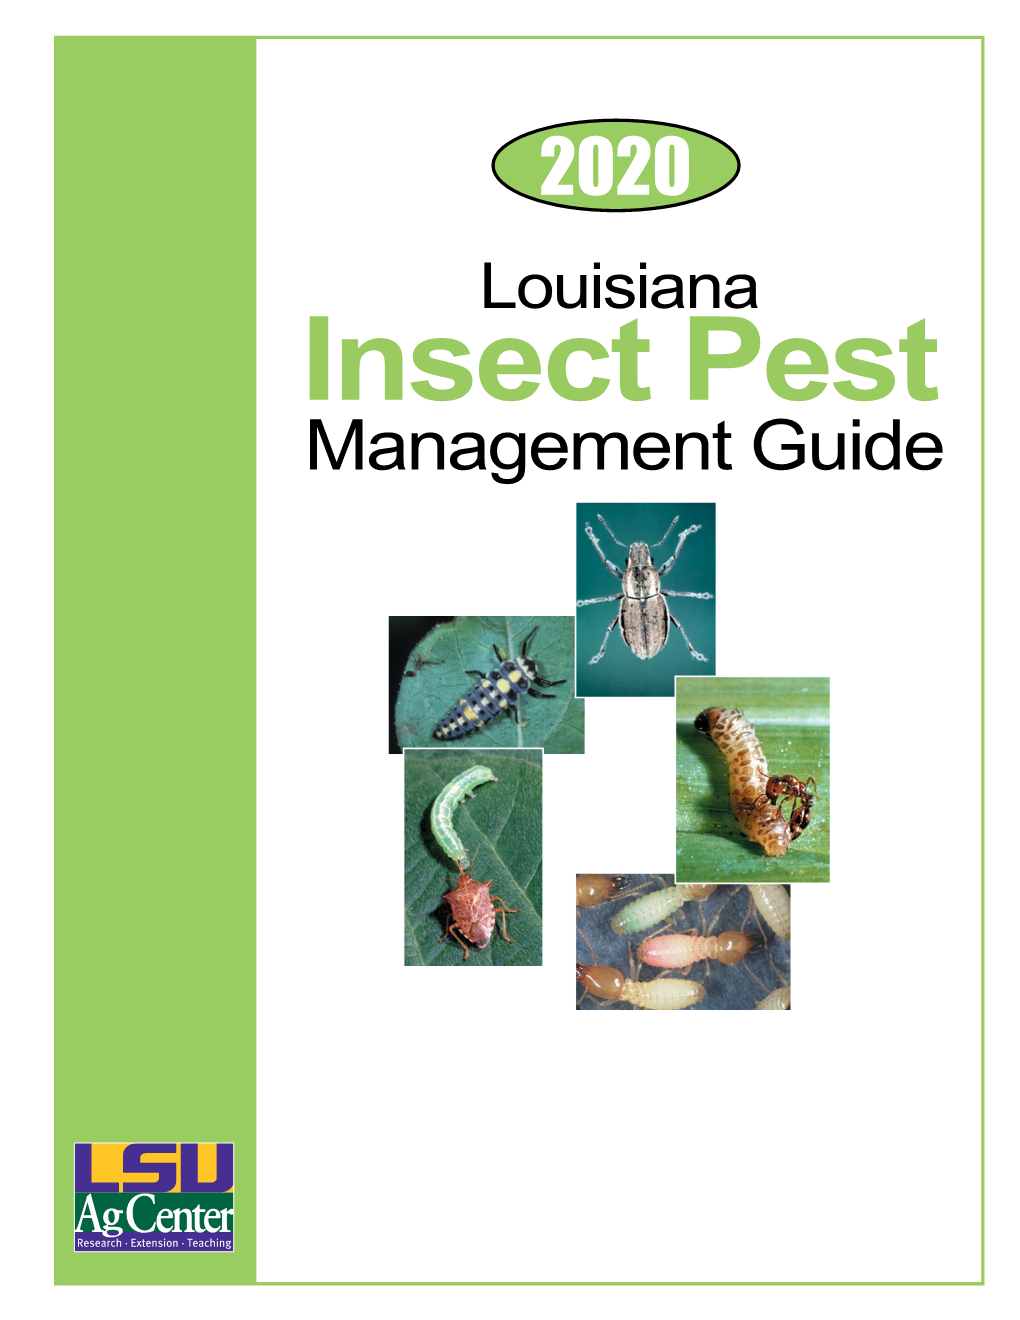 2020 Louisiana Insect Pest Management Guide 2020 Louisiana Insect Pest Management Guide